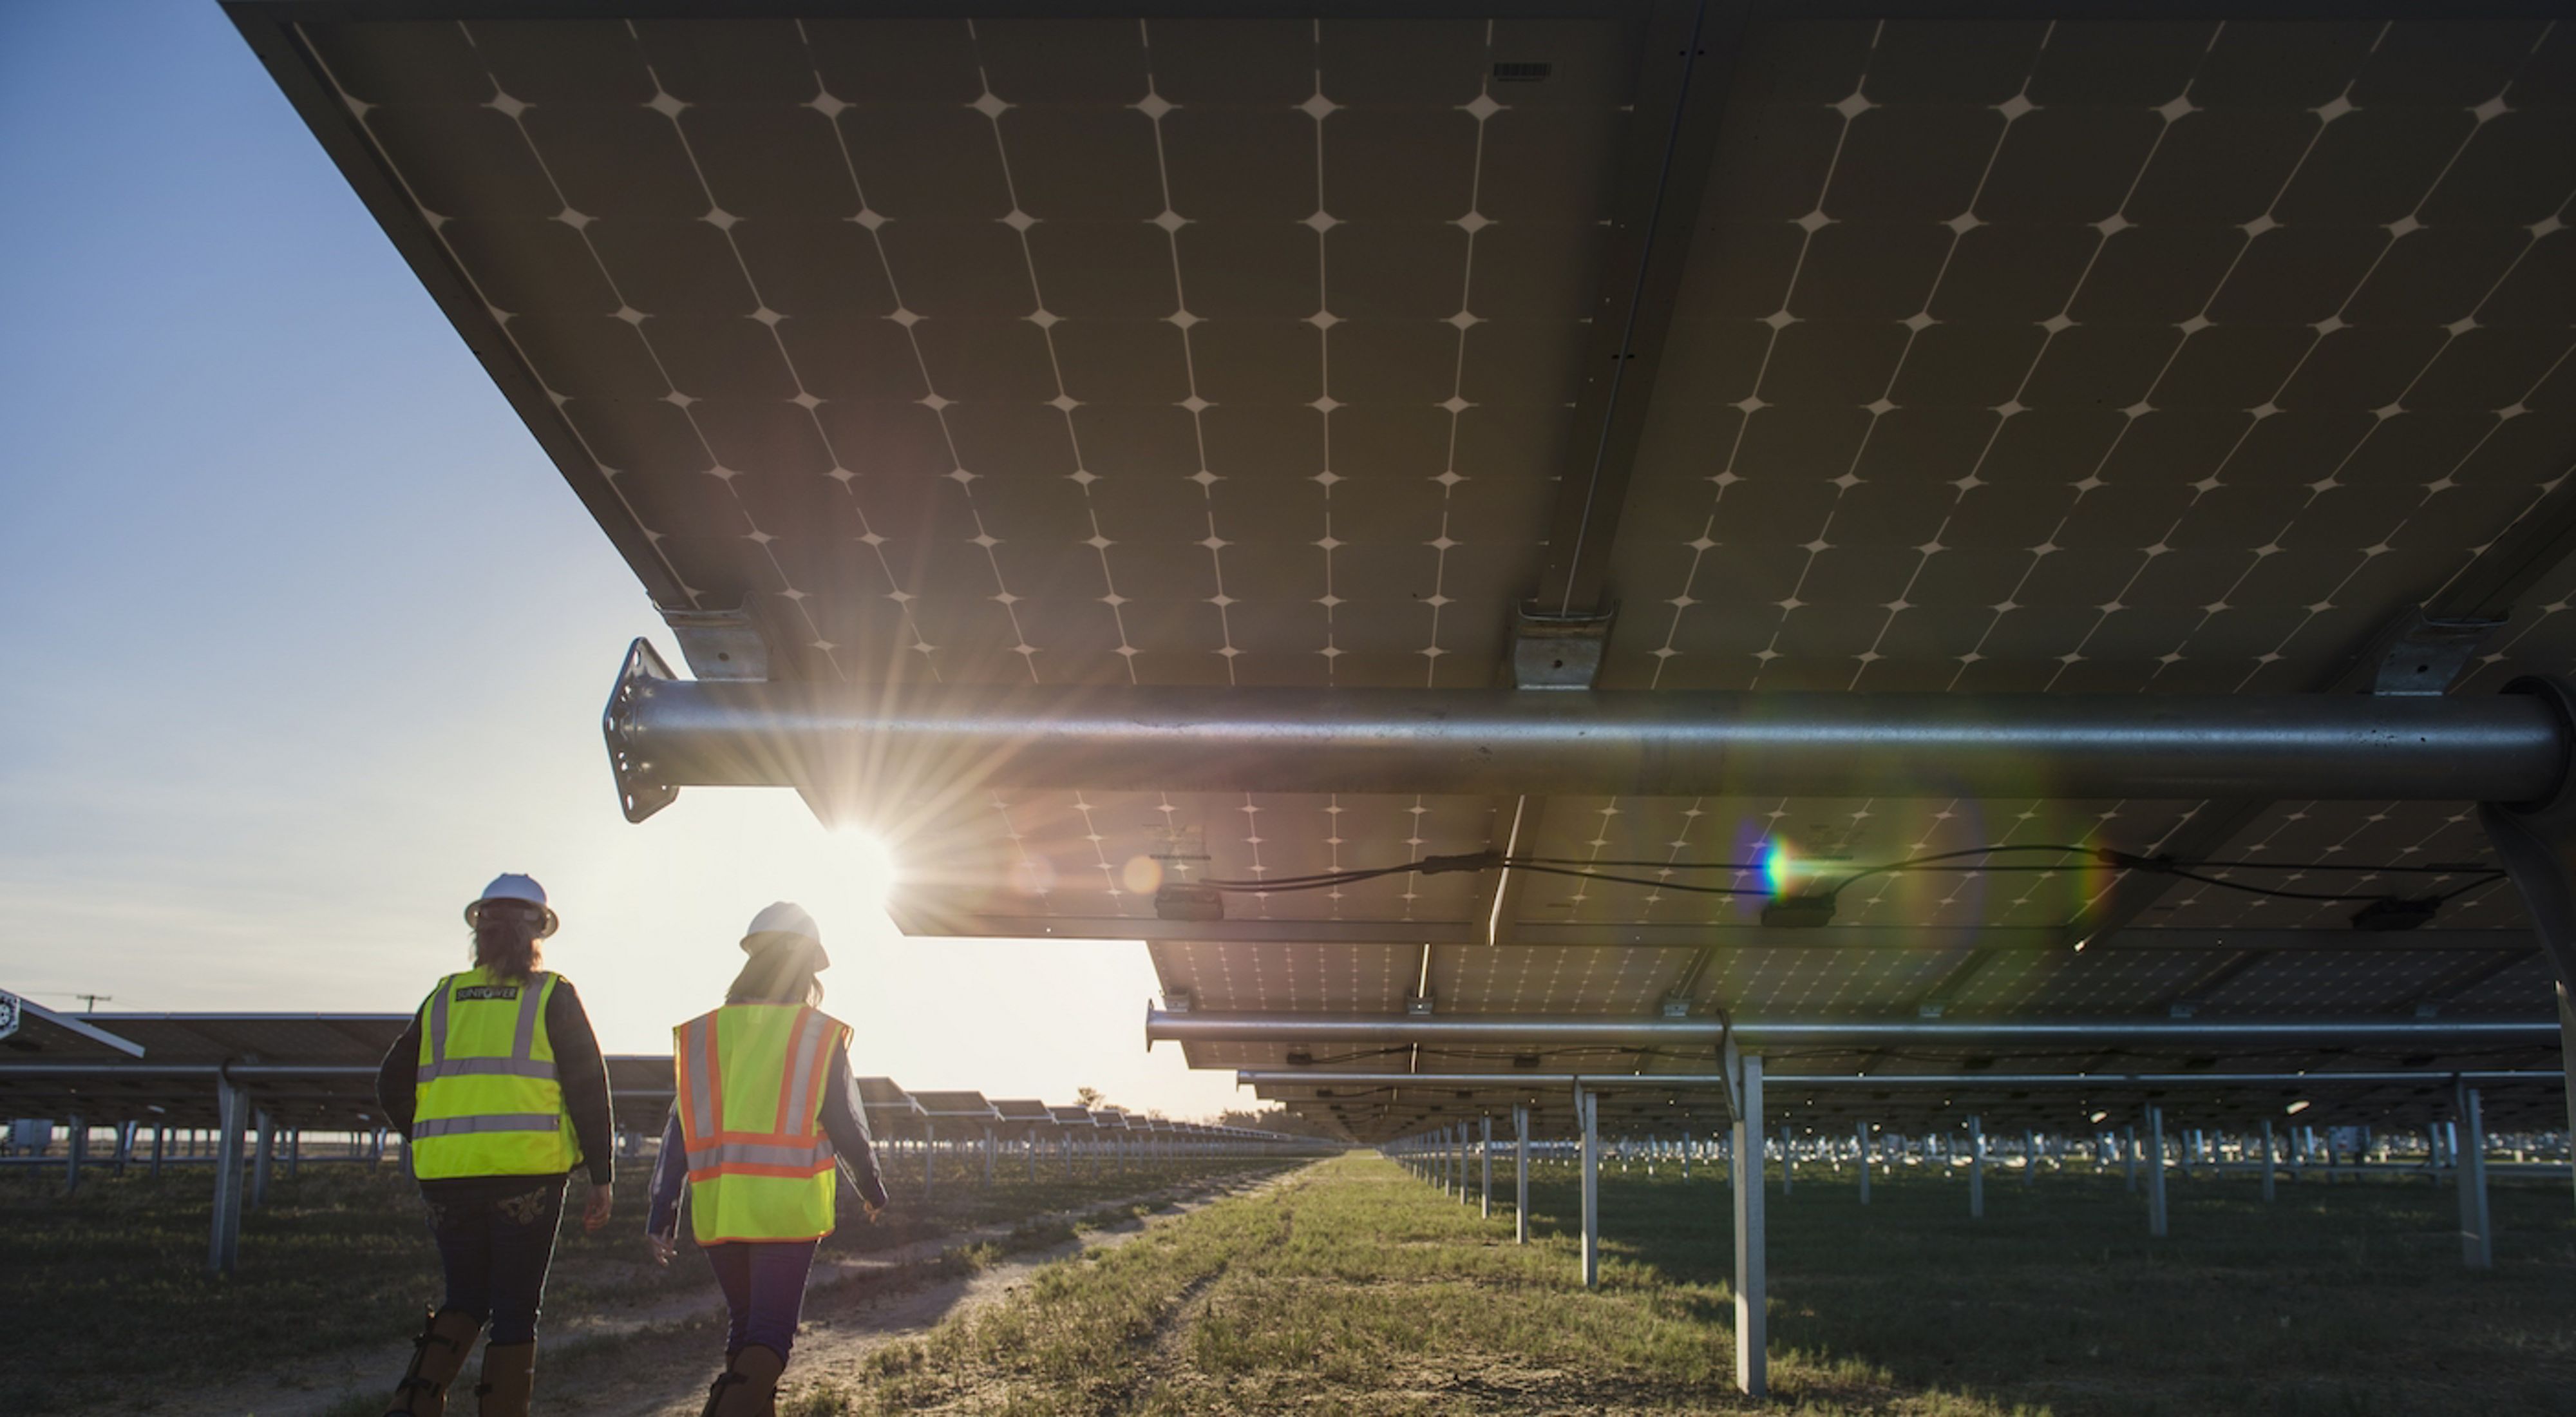 Two workers in hard hats and yellow jackets walk beneath solar panels with the sun peeking out.